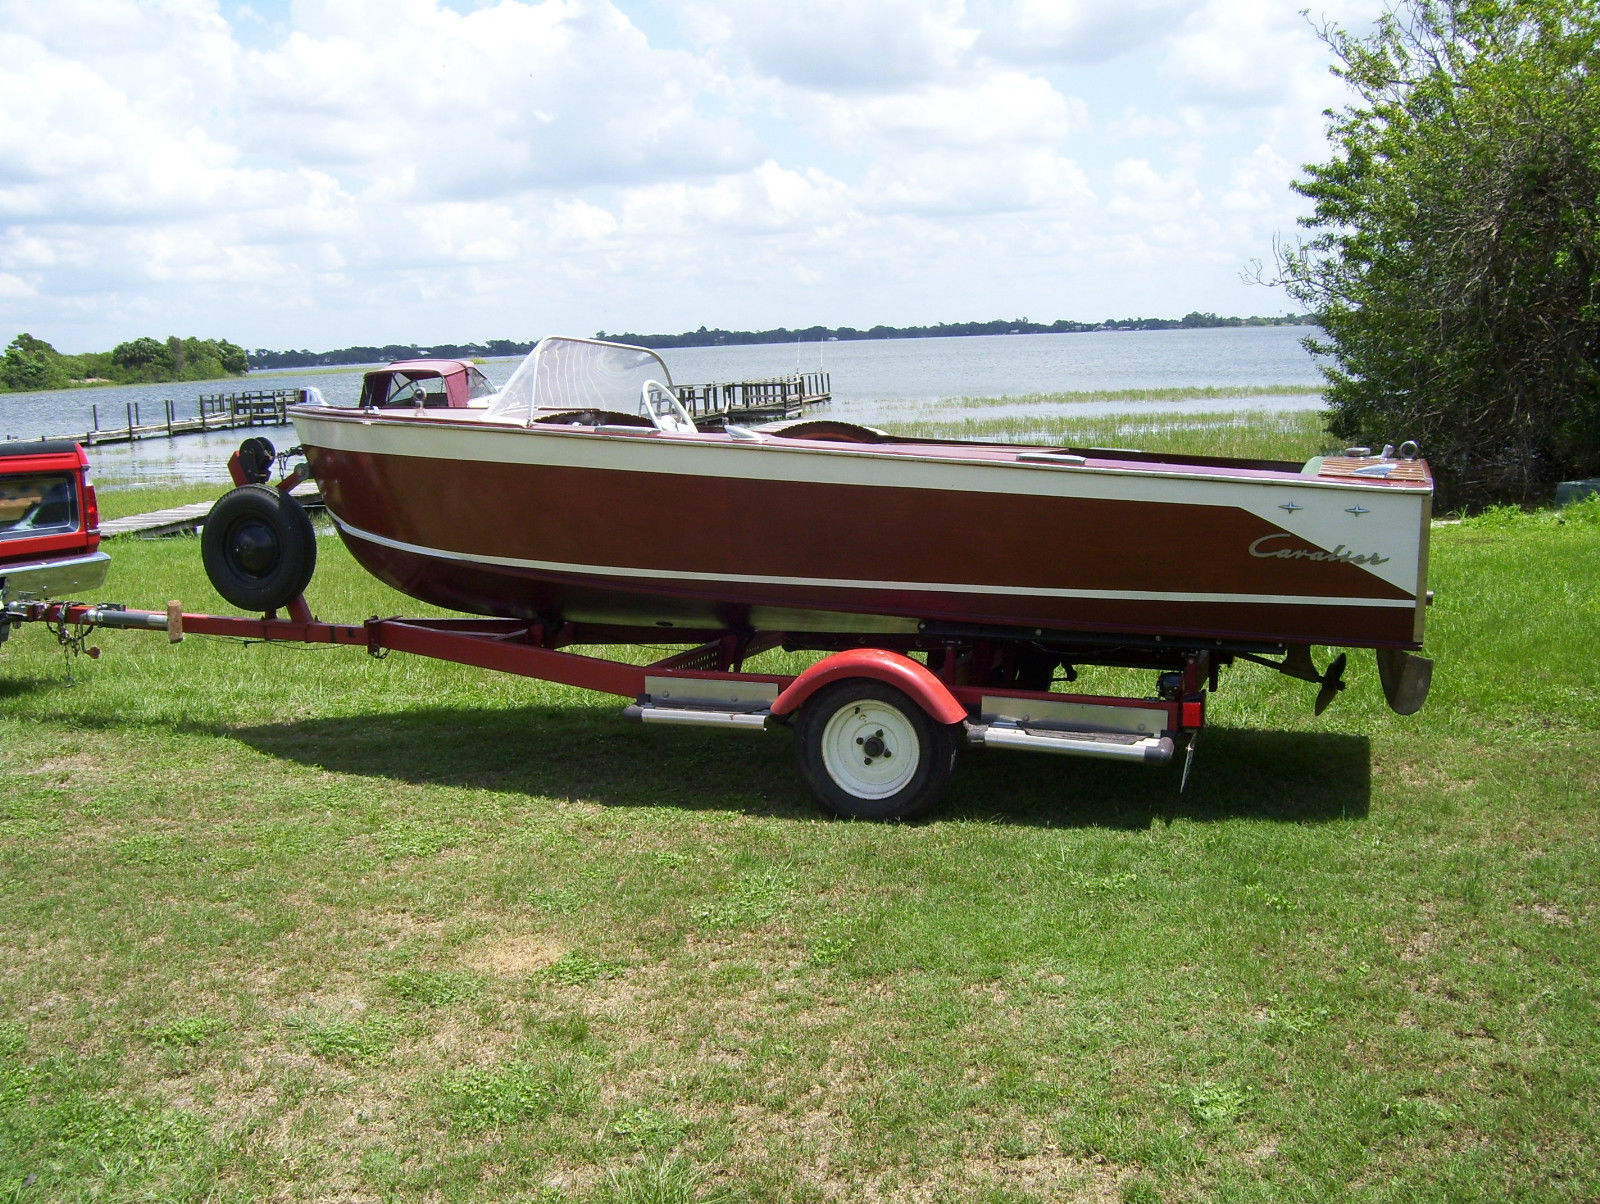 Chris Craft Wooden Boat 1958 for sale for $6,500 - Boats 